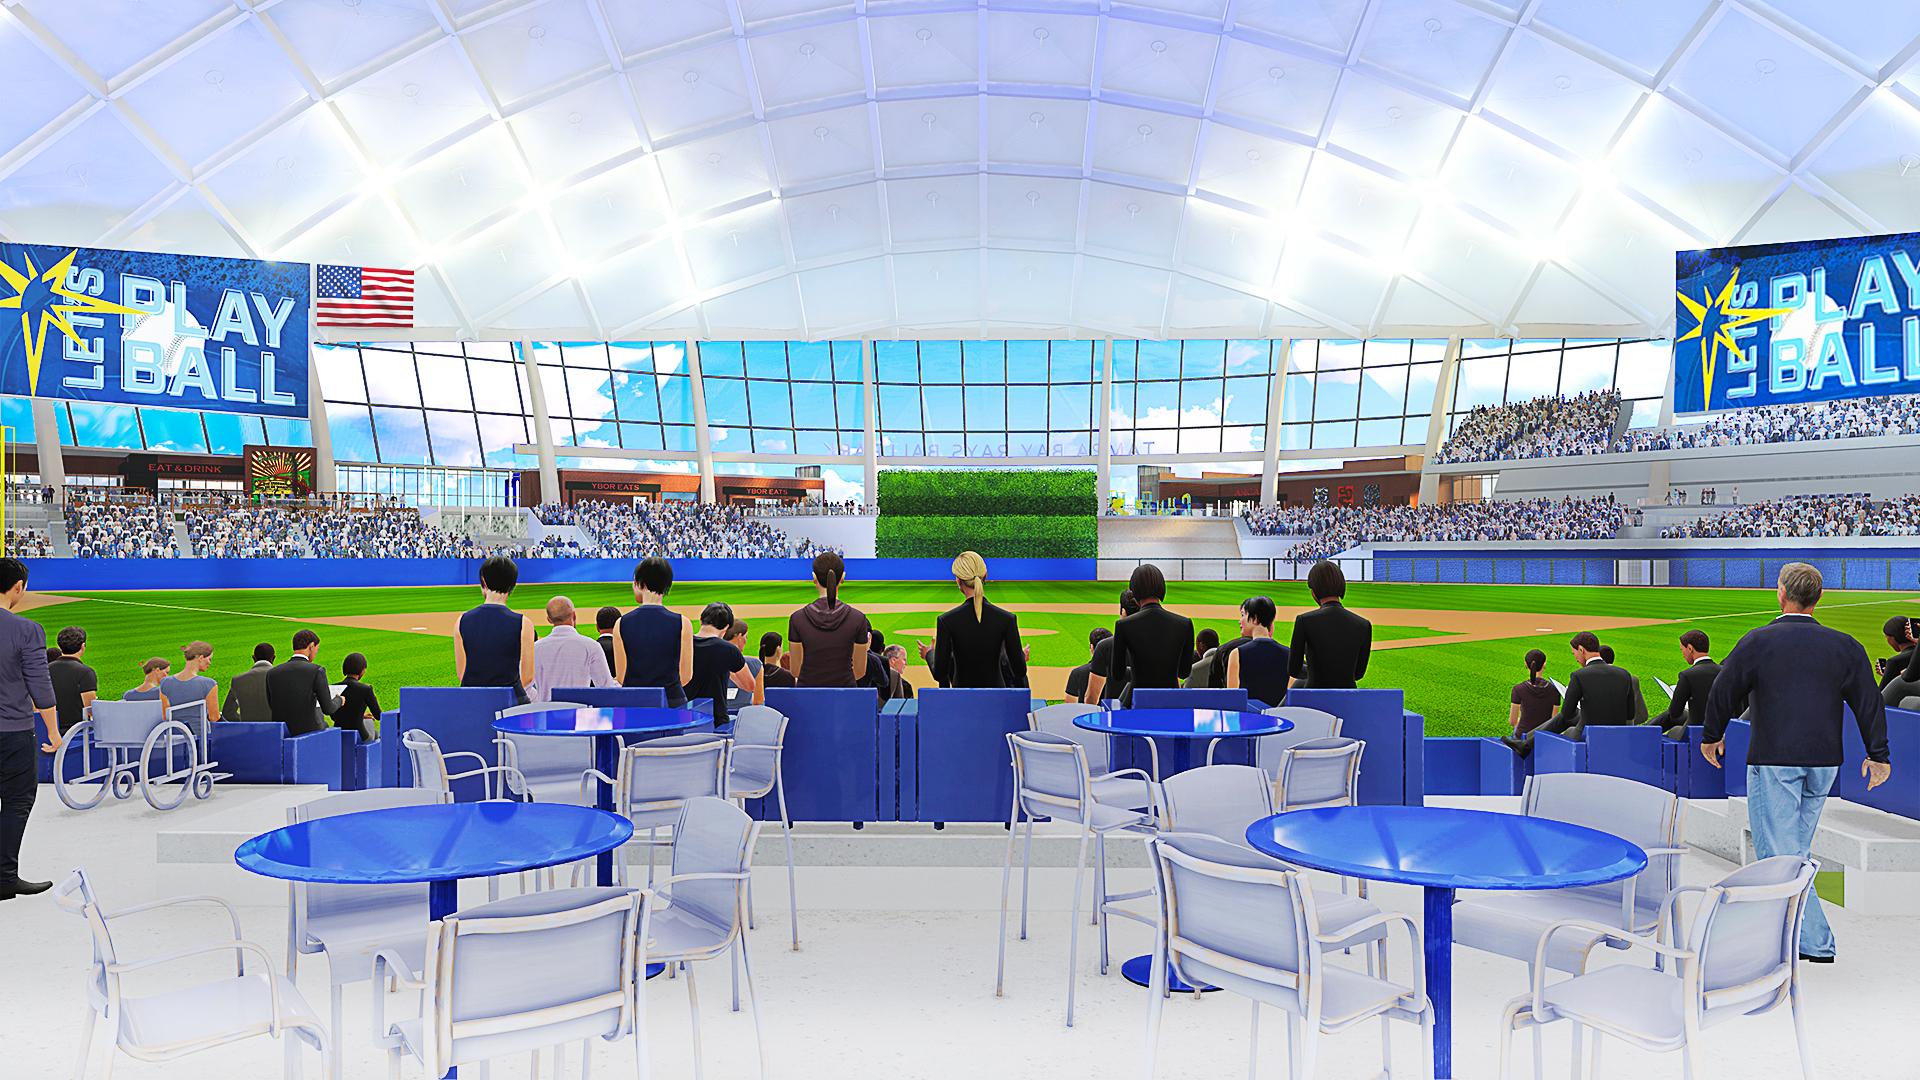 Tampa Bay Rays on X: With a capacity of just 30,842, the design for our new  ballpark makes it the most intimate in MLB, with a variety of new seating  types. Tell